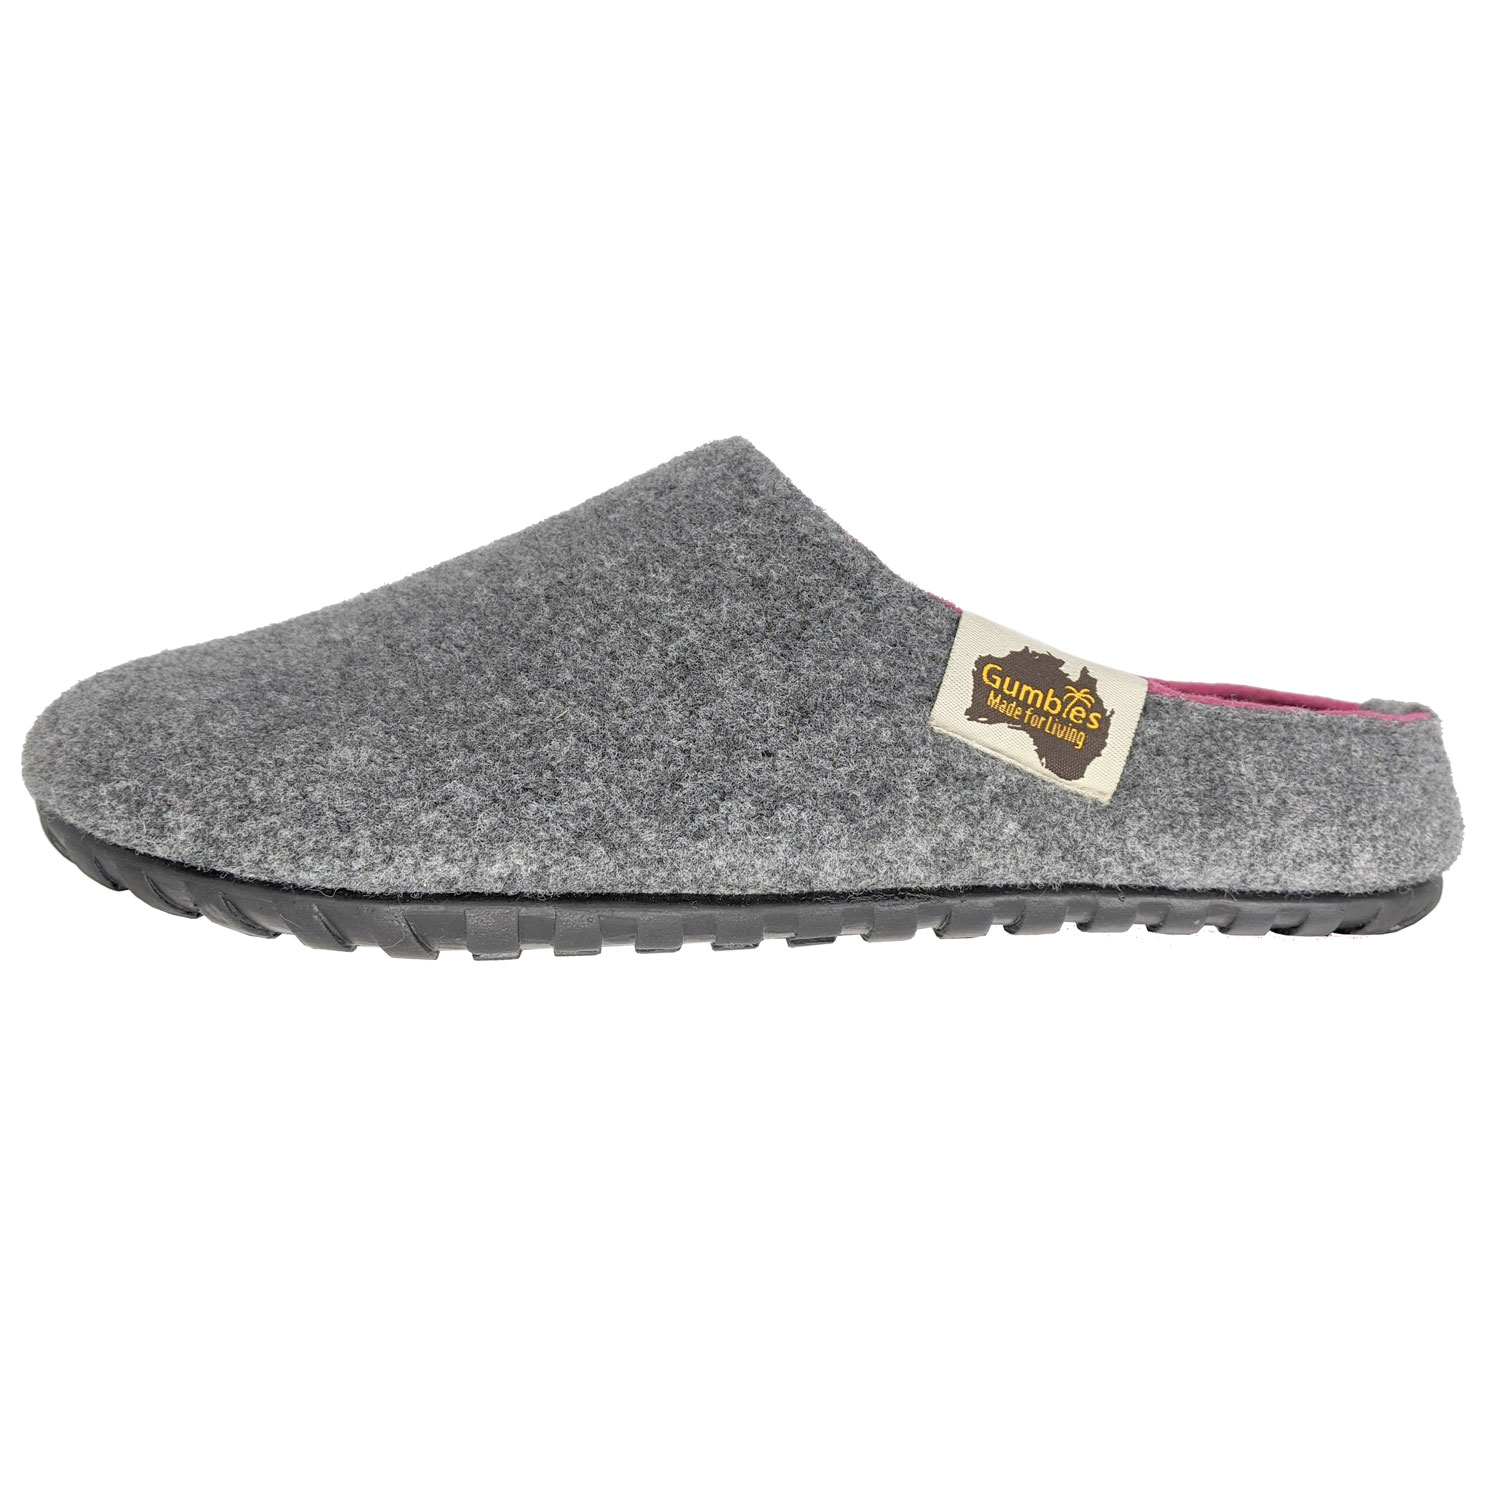 GUMBIES – Outback Slipper, GREY-PINK 